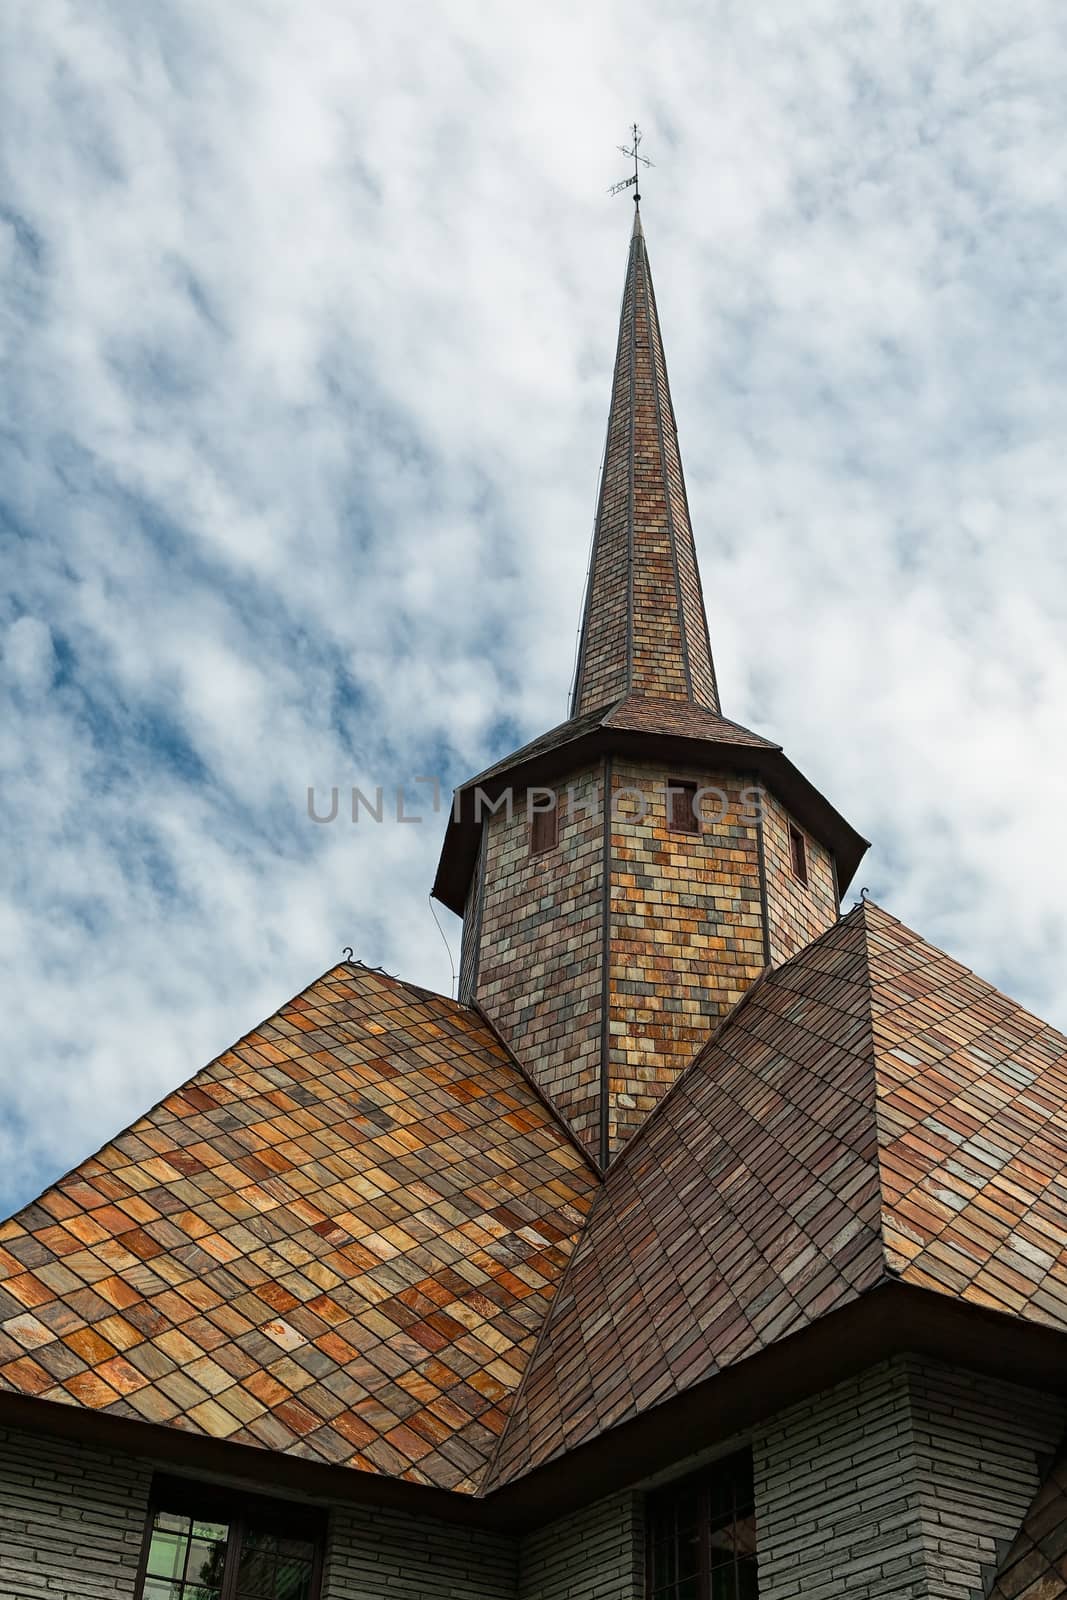 Closeup of the rooftop of the little church in Dombas village in Norway under a cloudy sky